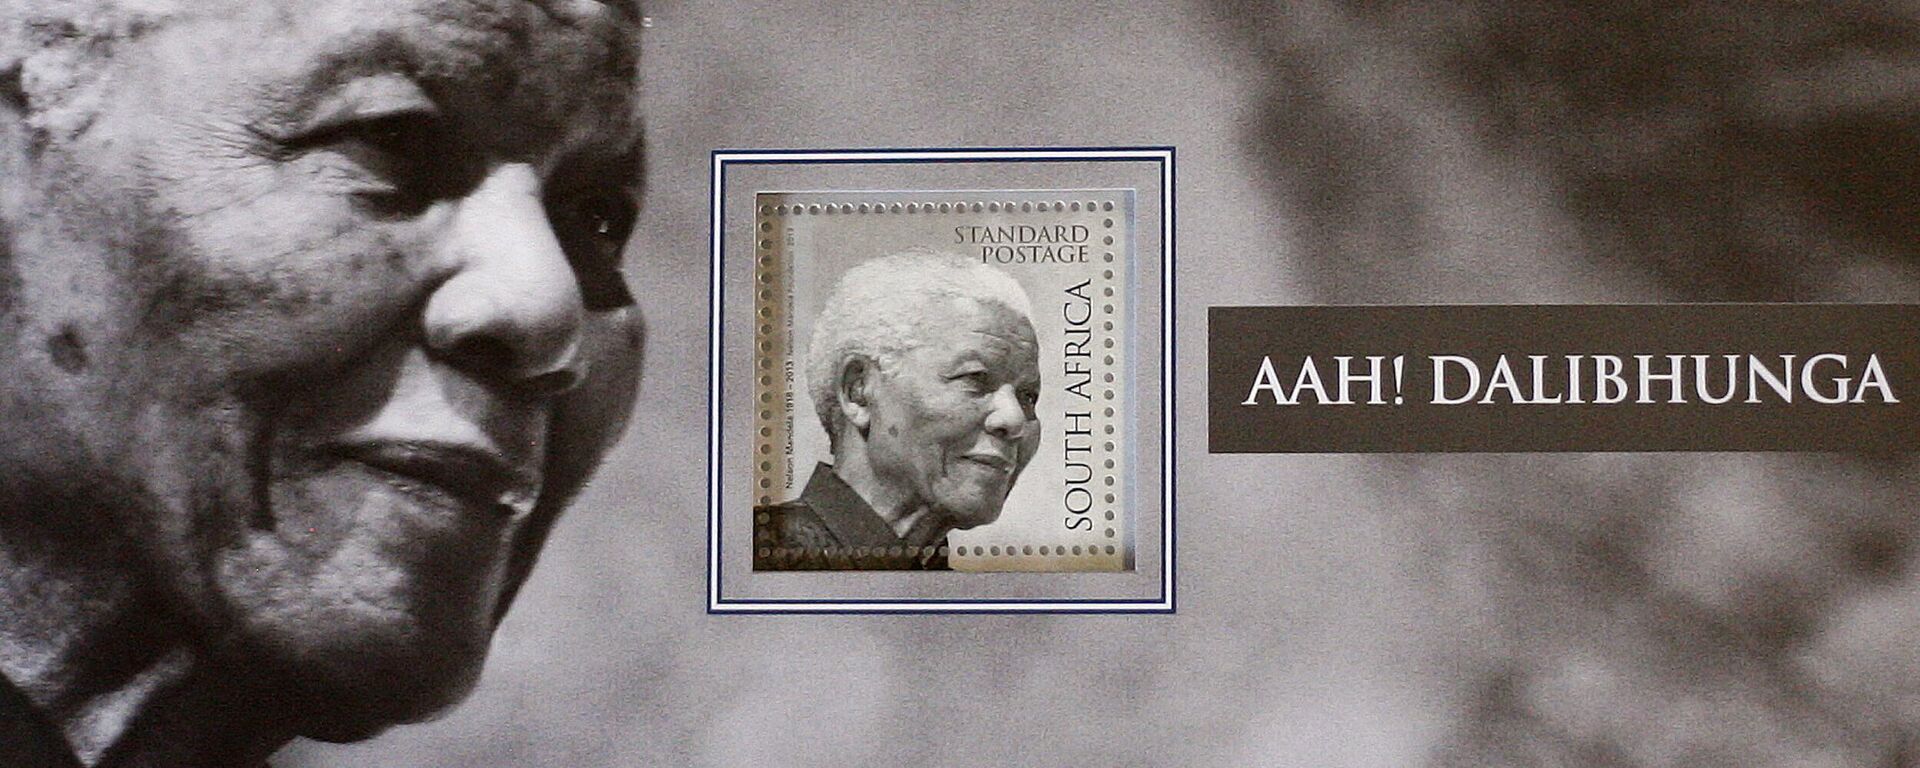 A copy of a postal stamp with a portrait of Nelson Mandela, launched at the Mandela Foundation for the 24th anniversary of his release from prison, in Johannesburg, South Africa, Tuesday, Feb. 11, 2014.  When Nelson Mandela won the Nobel Peace Prize in 1993, South Africa's post office issued a stamp with his image. It released another when Mandela was inaugurated as South Africa's first black president in the following year. Then one more when the former president turned 90 in 2008. The postal service issued a fourth commemorative stamp with a portrait of Mandela on Tuesday, the 24th anniversary of his release from prison during white minority rule. He died Dec. 5 at the age of 95.  - Sputnik Africa, 1920, 11.05.2023